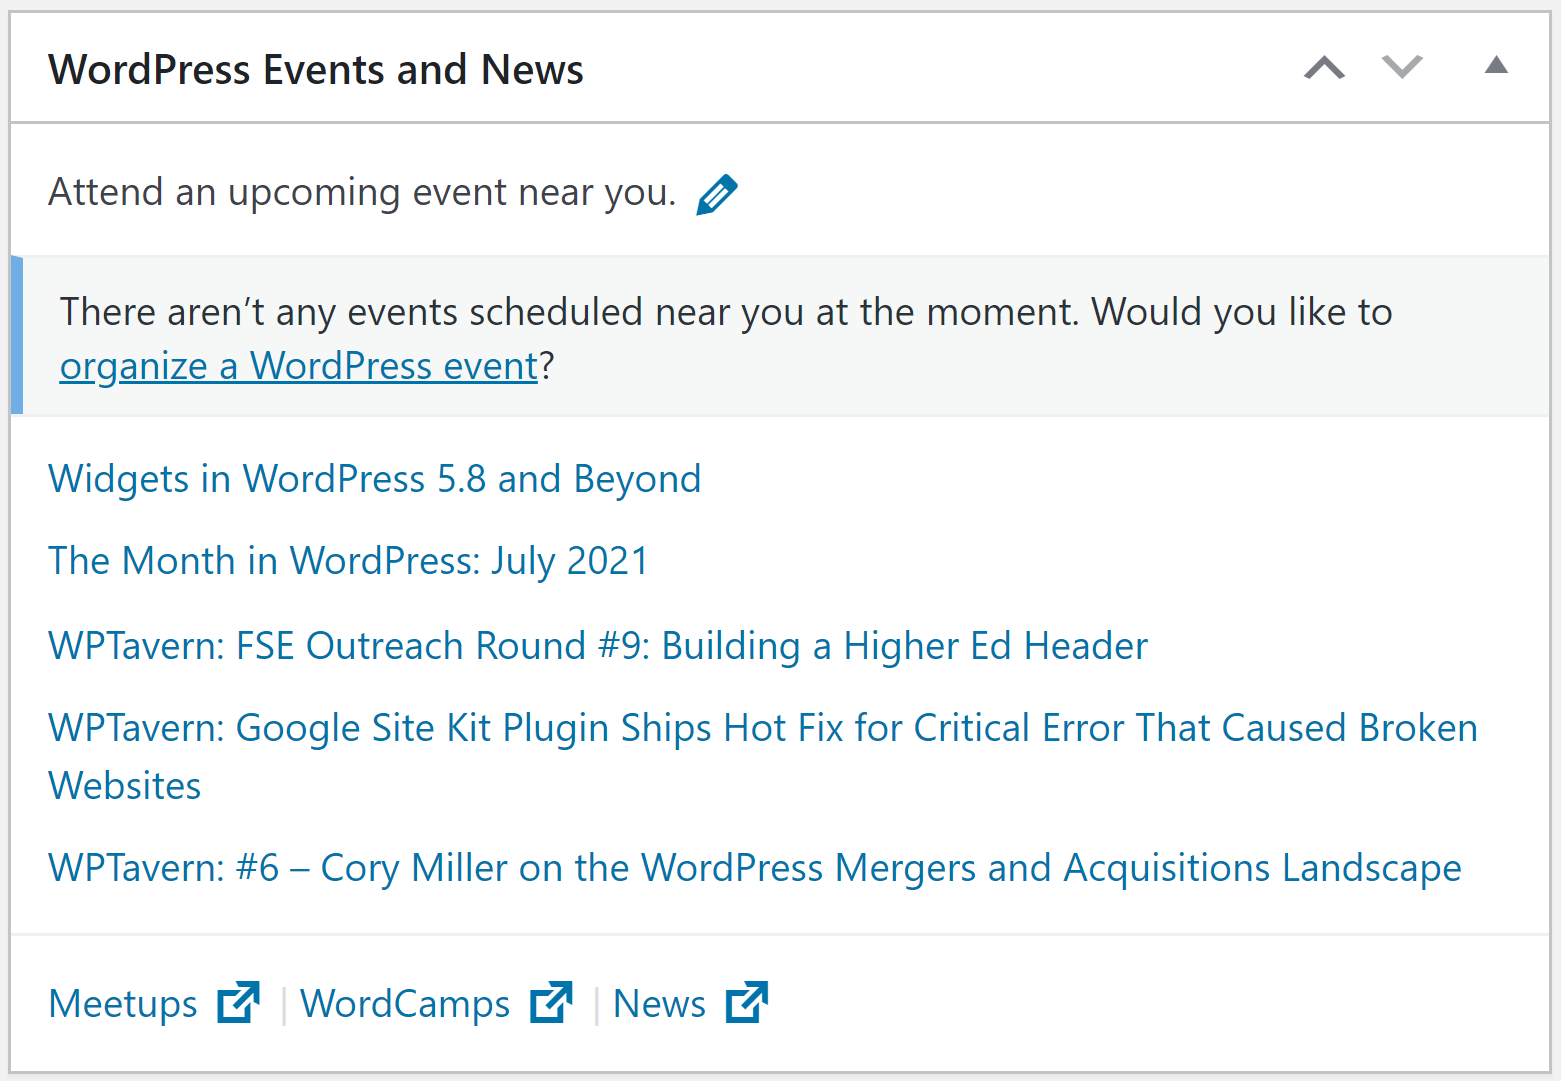 The WordPress events and news widget gives you links to meetups, events, and news.